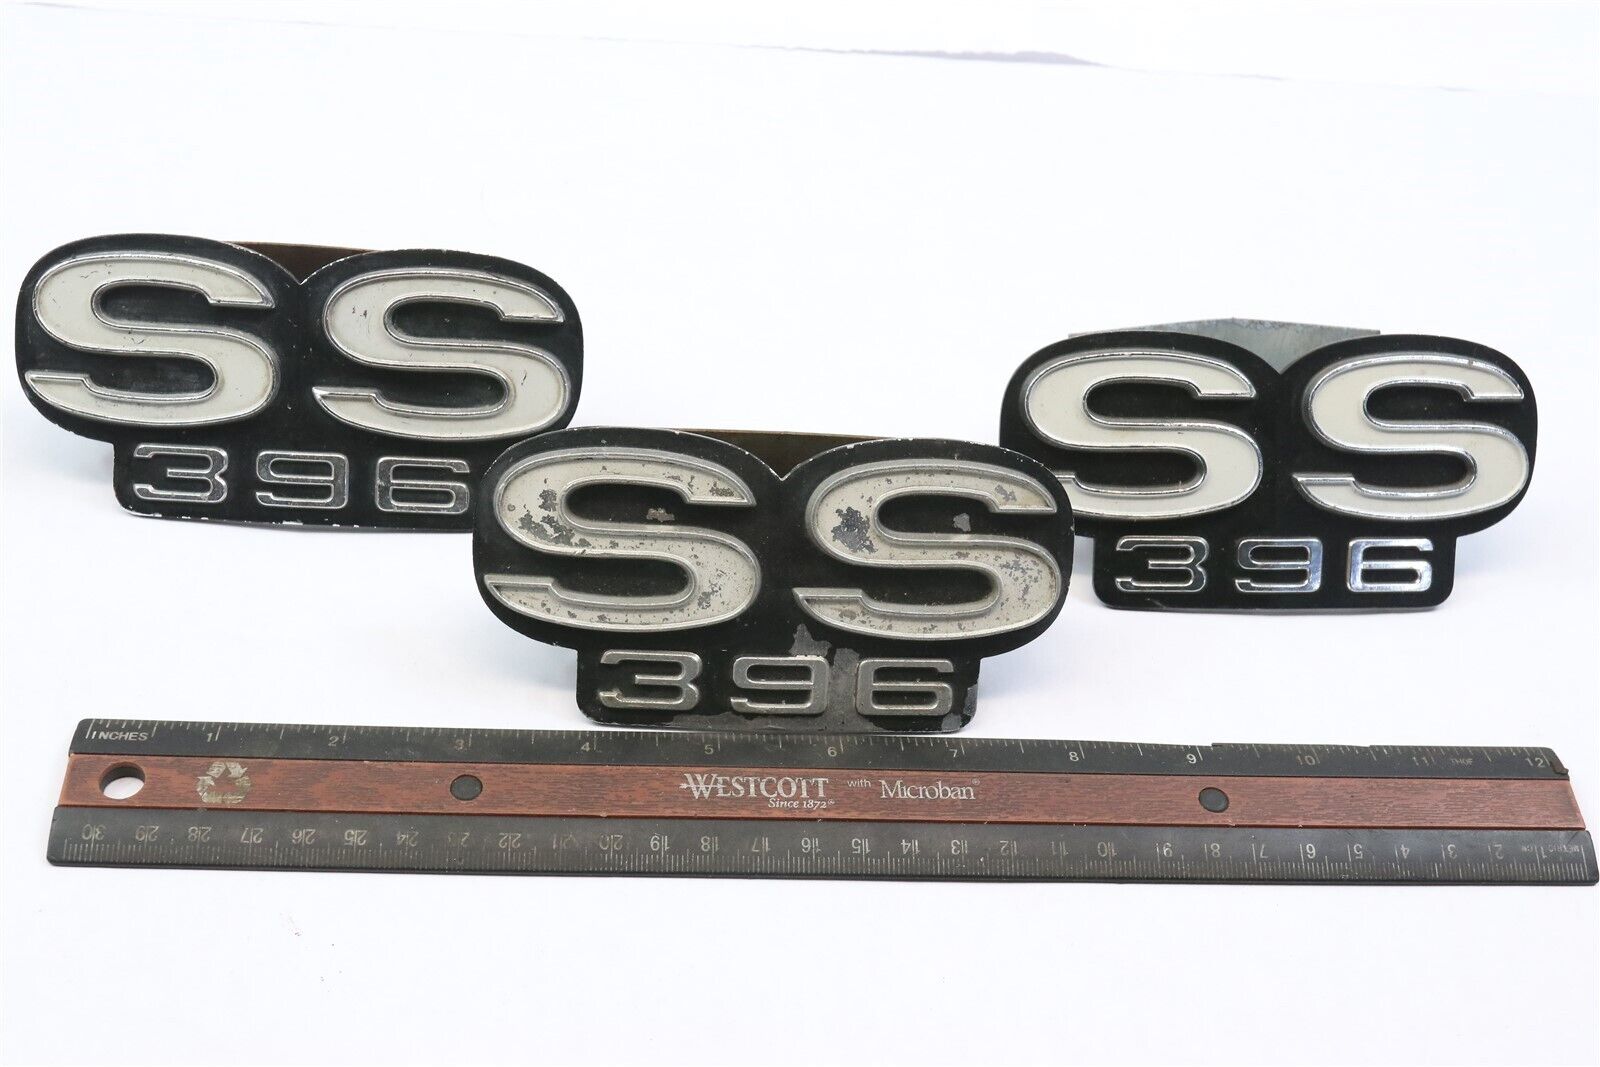 1967 CHEVROLET CHEVELLE SS 396 GRILL EMBLEMS OEM ORIGINALS SOLD AS A LOT OF 3